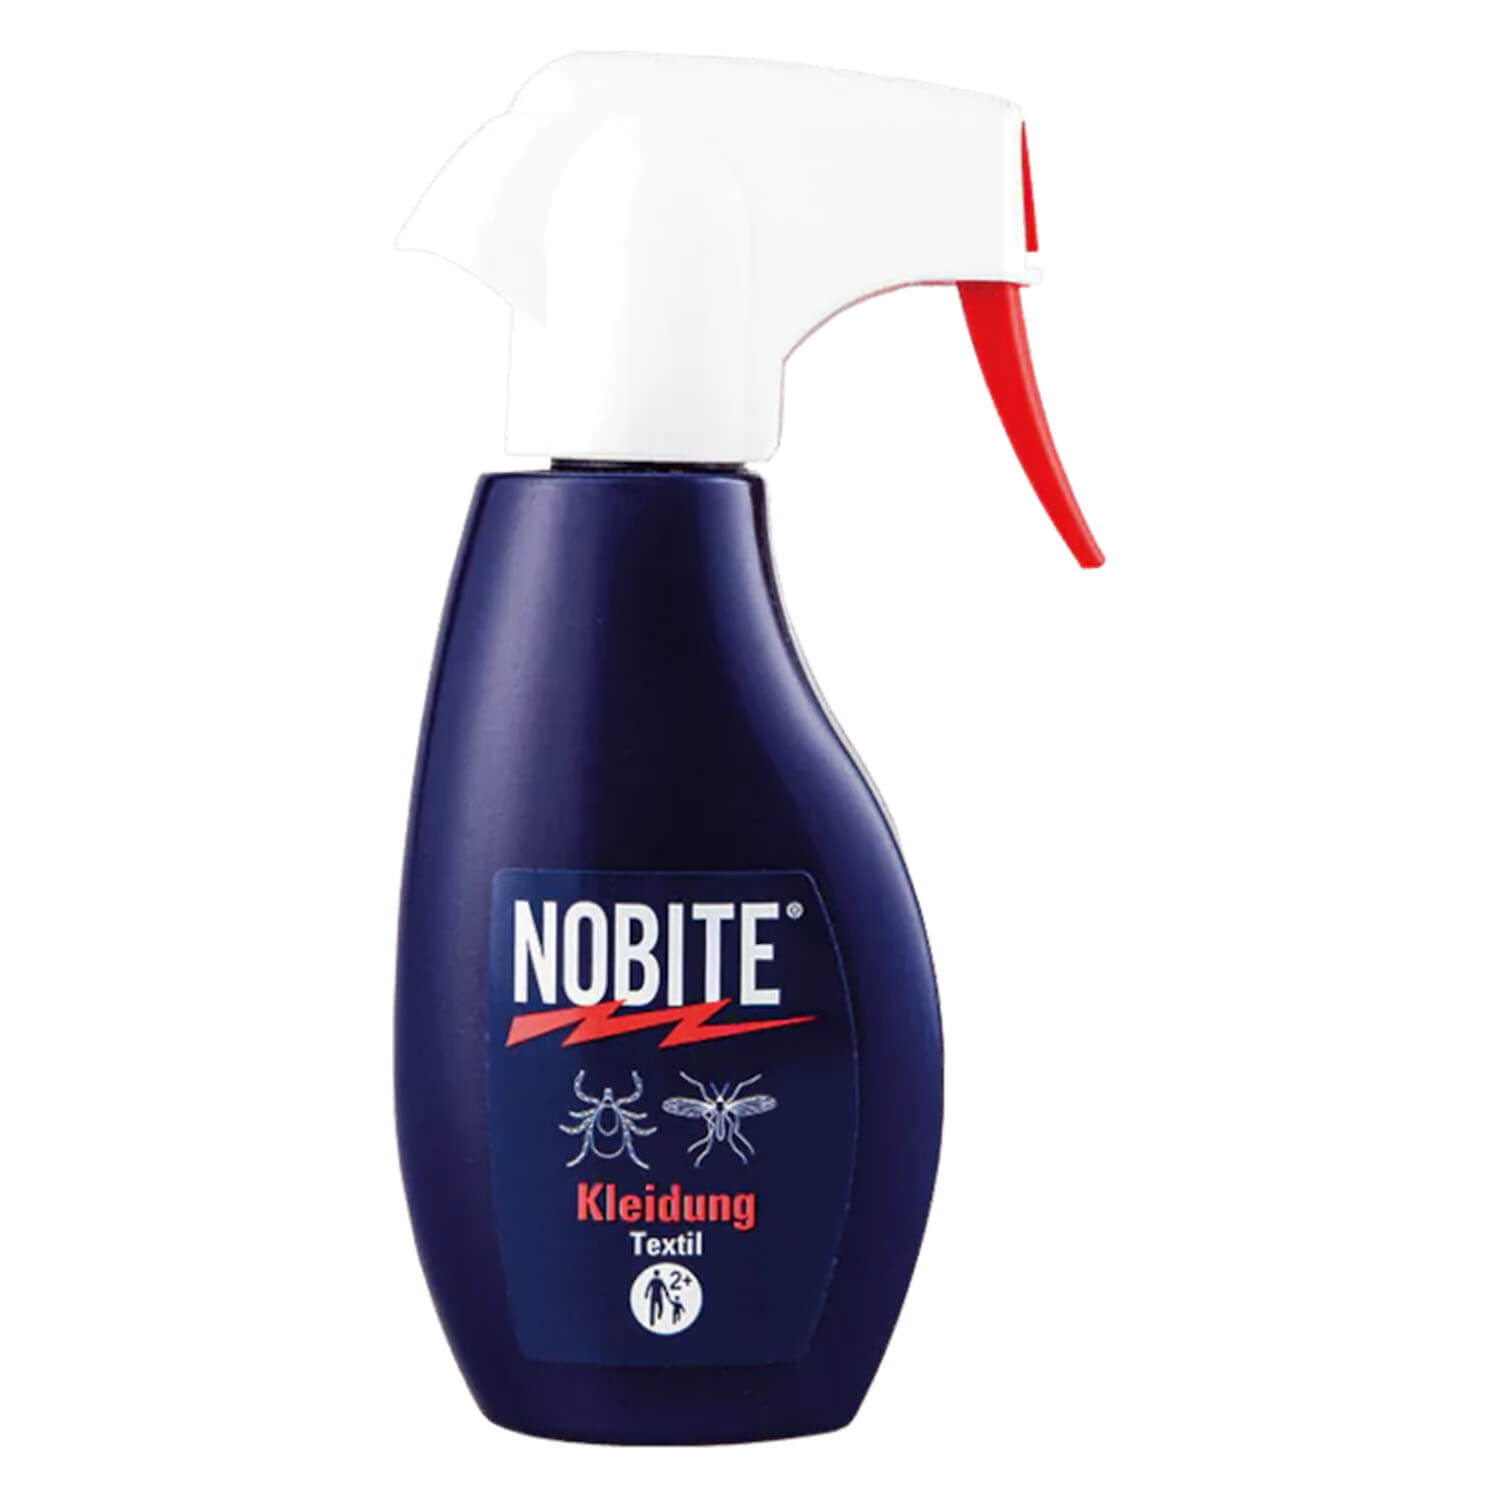 Nobite insect protection spray 200ml - Hunting Equipment